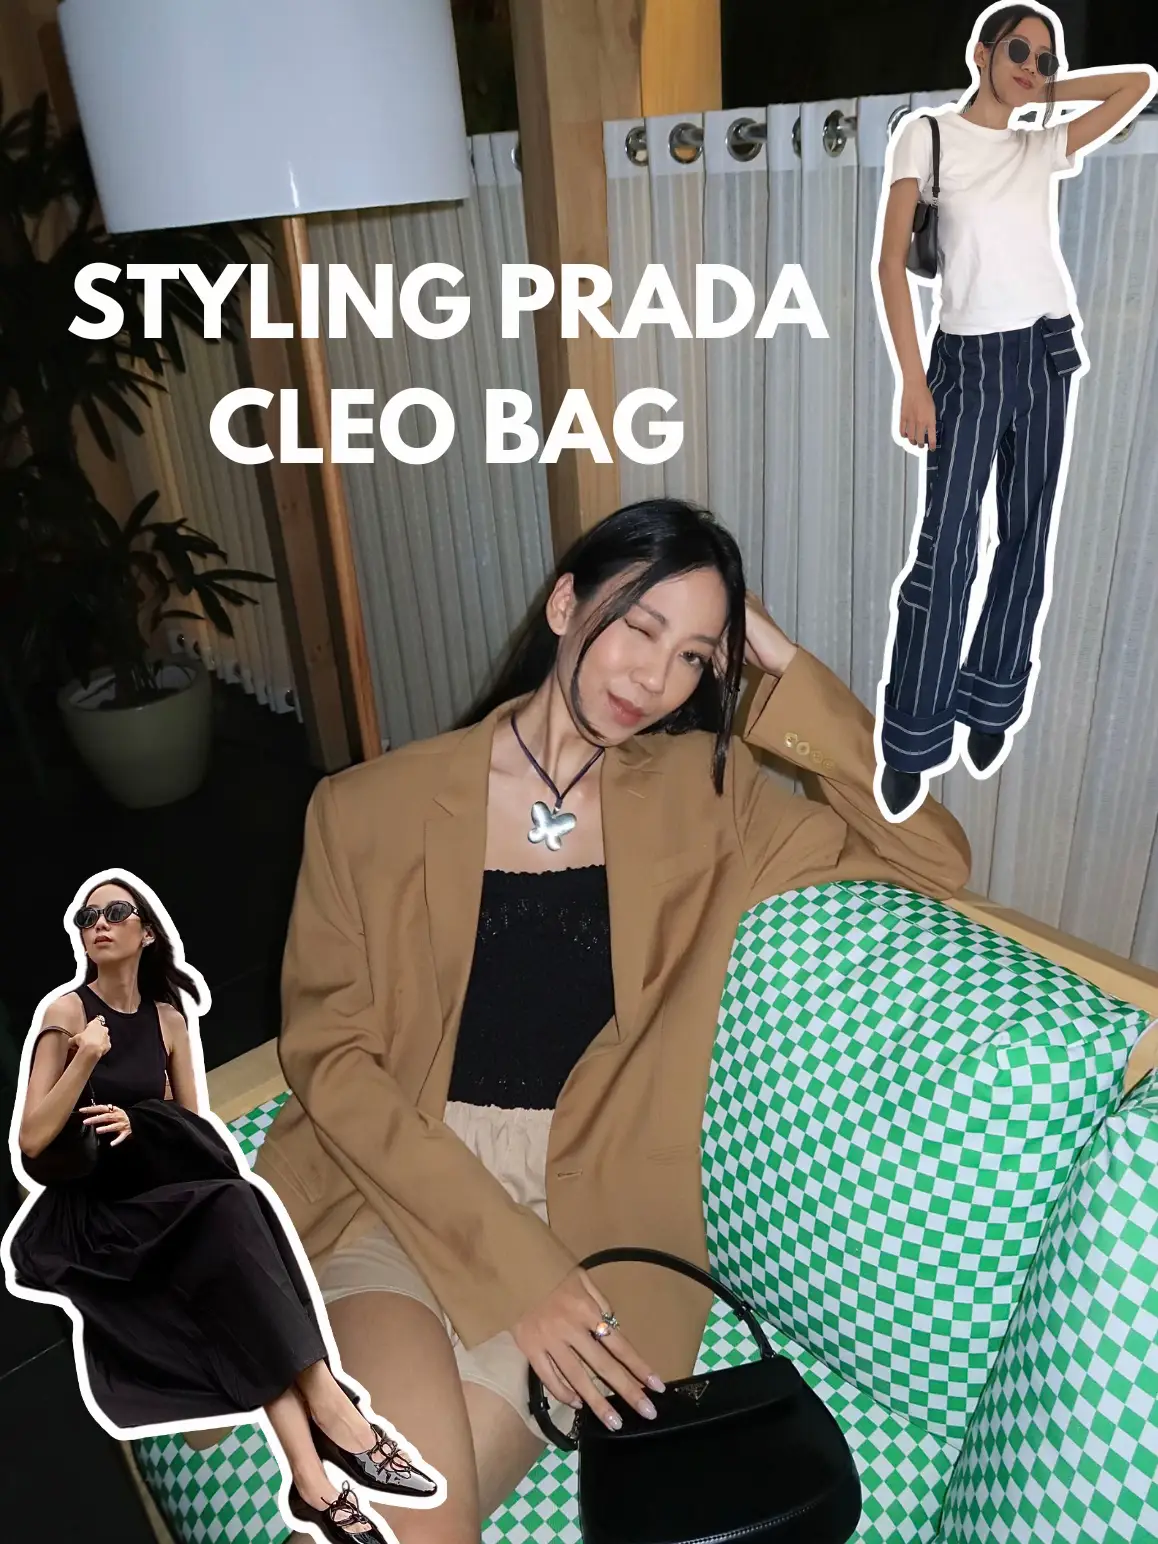 Cara styling prada cleo bag!🥰👍🏻, Gallery posted by Zsazsa